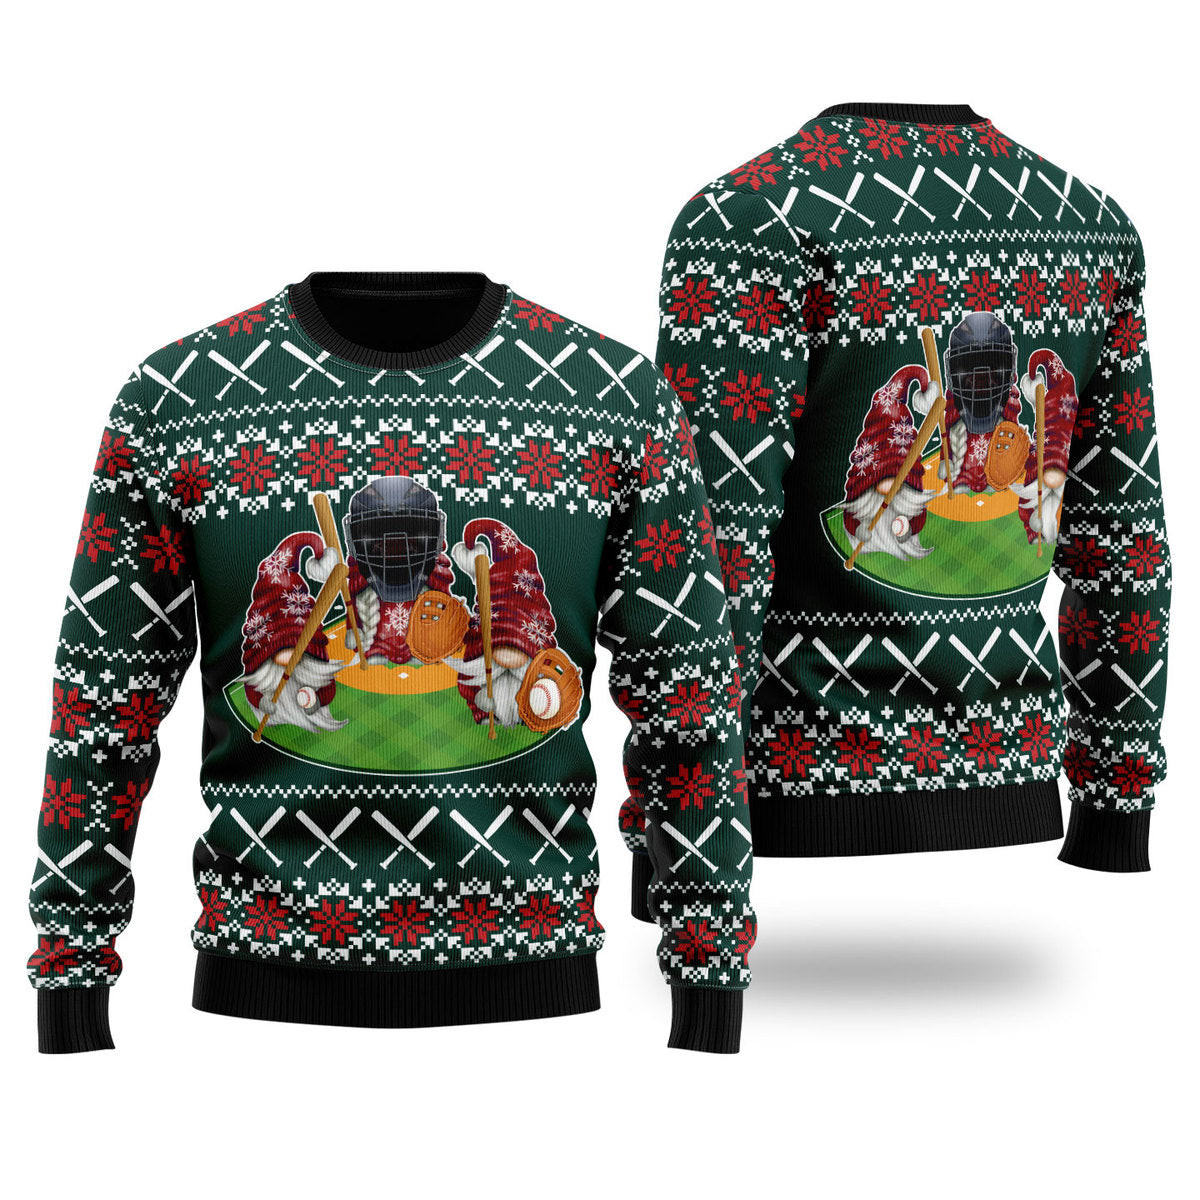 Gnomes Love Christmas Baseball Ugly Christmas Sweater Ugly Sweater For Men Women, Holiday Sweater